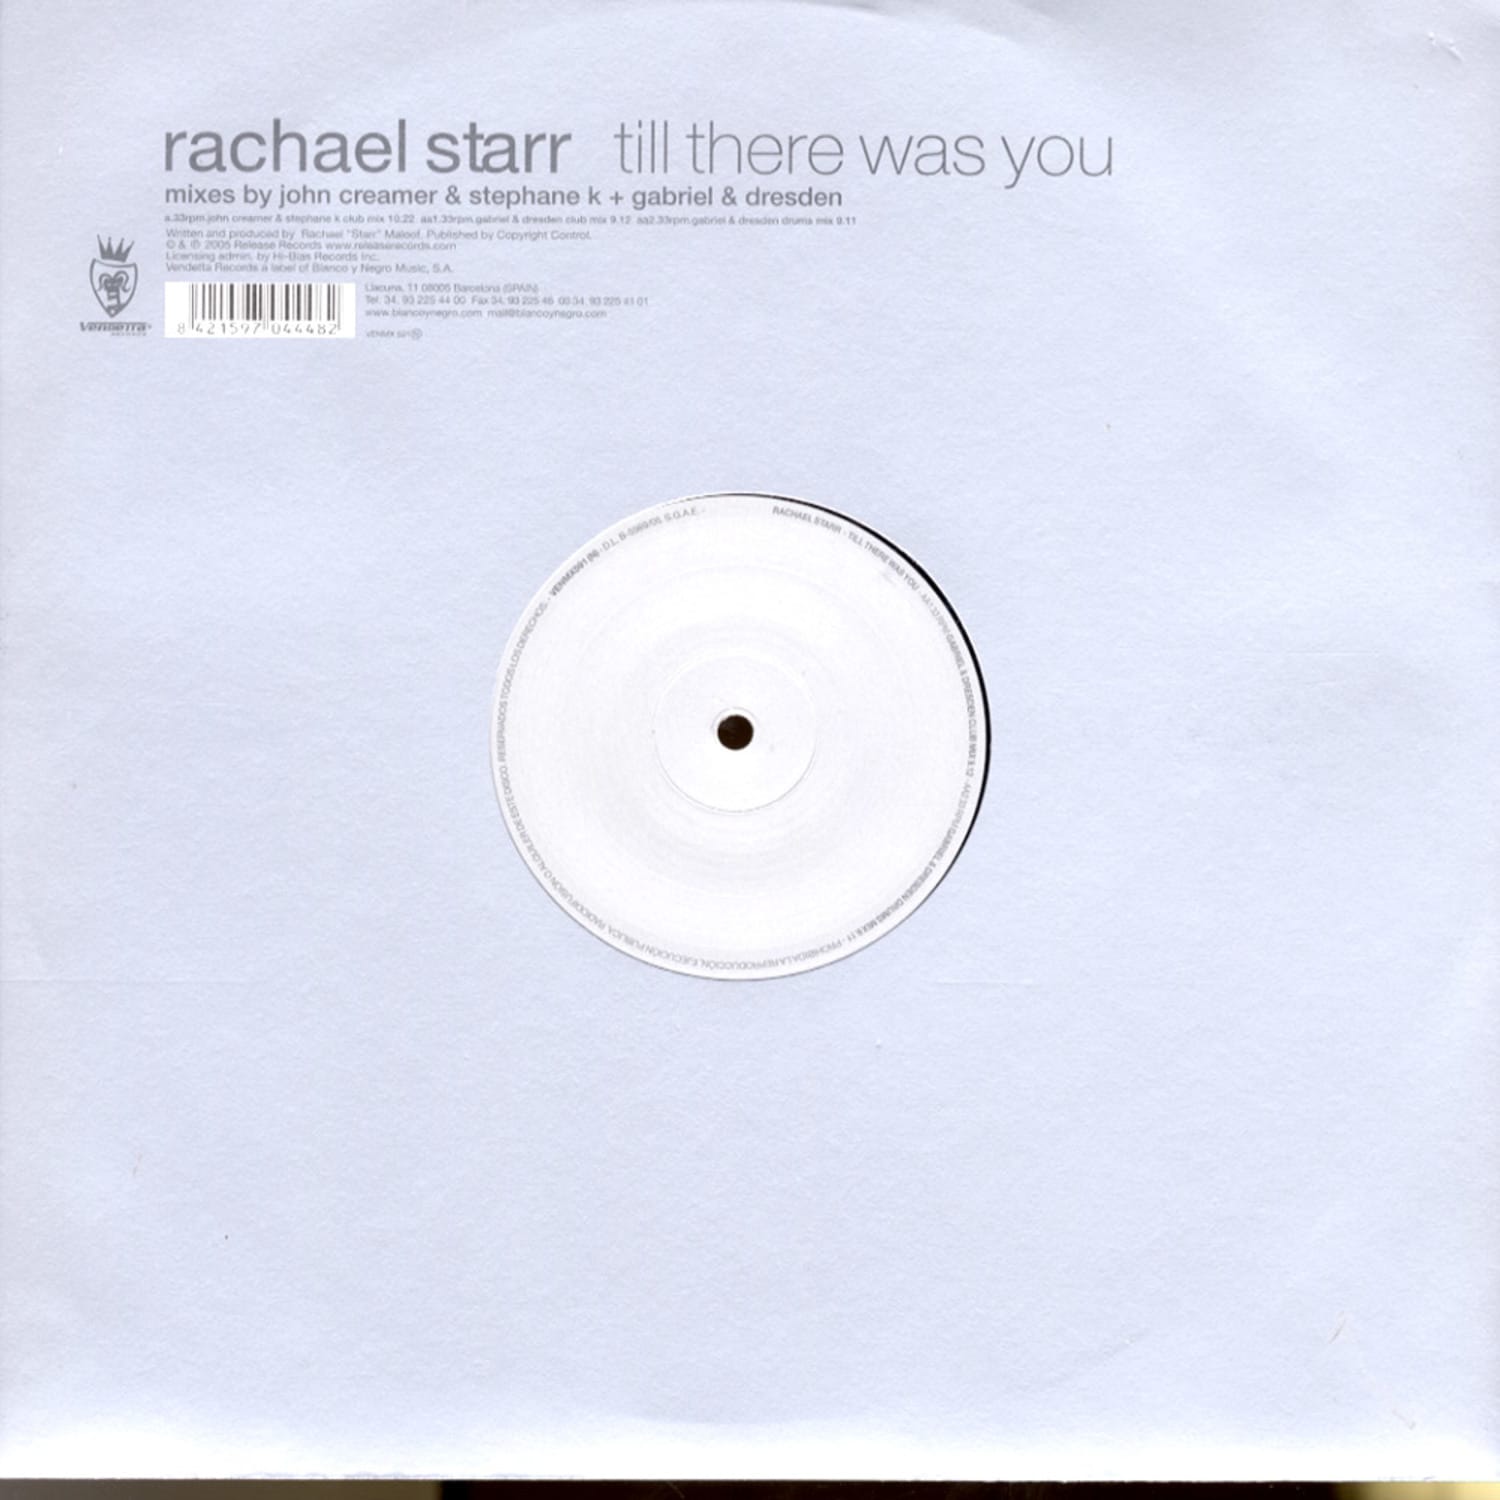 Rachael Starr - TILL THERE WAS YOU